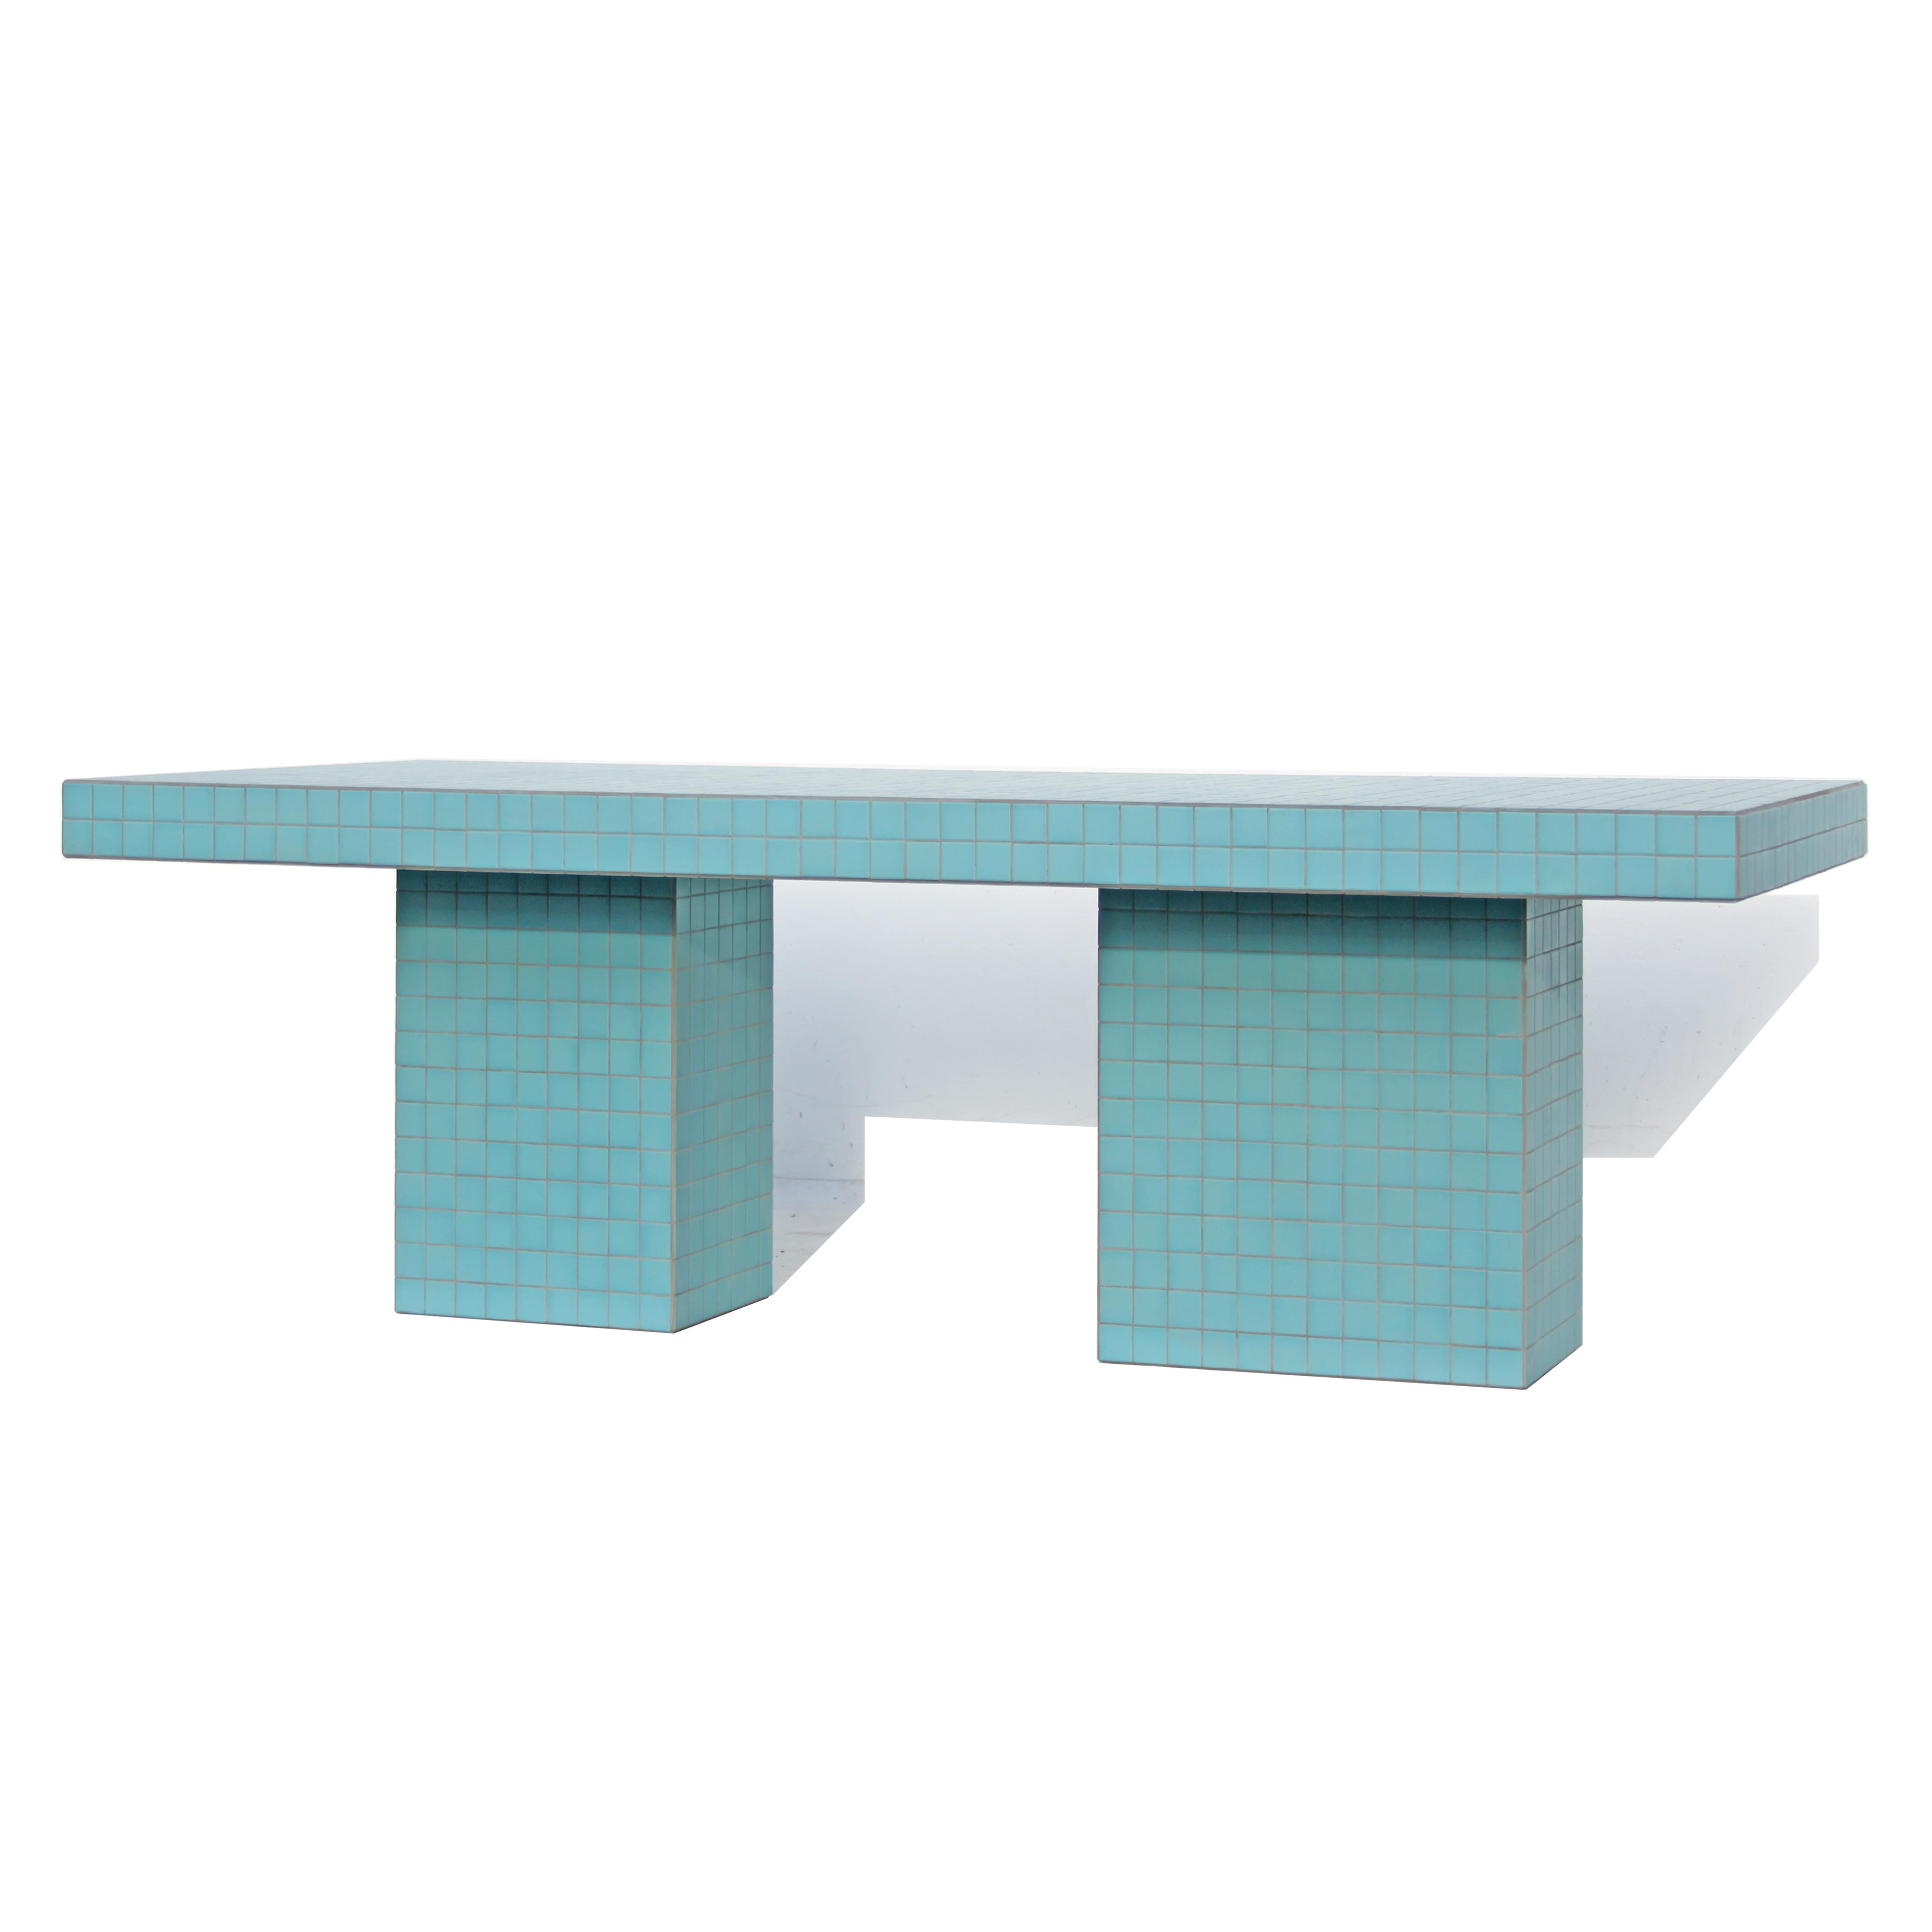 Designed and made by Nima Abili in Los Angeles this handcrafted table is cladded with ocean blue matte porcelain tiles and sanded grey grout. Inspired by Brutalist style of architecture this collection offers a variety of pieces designed based on